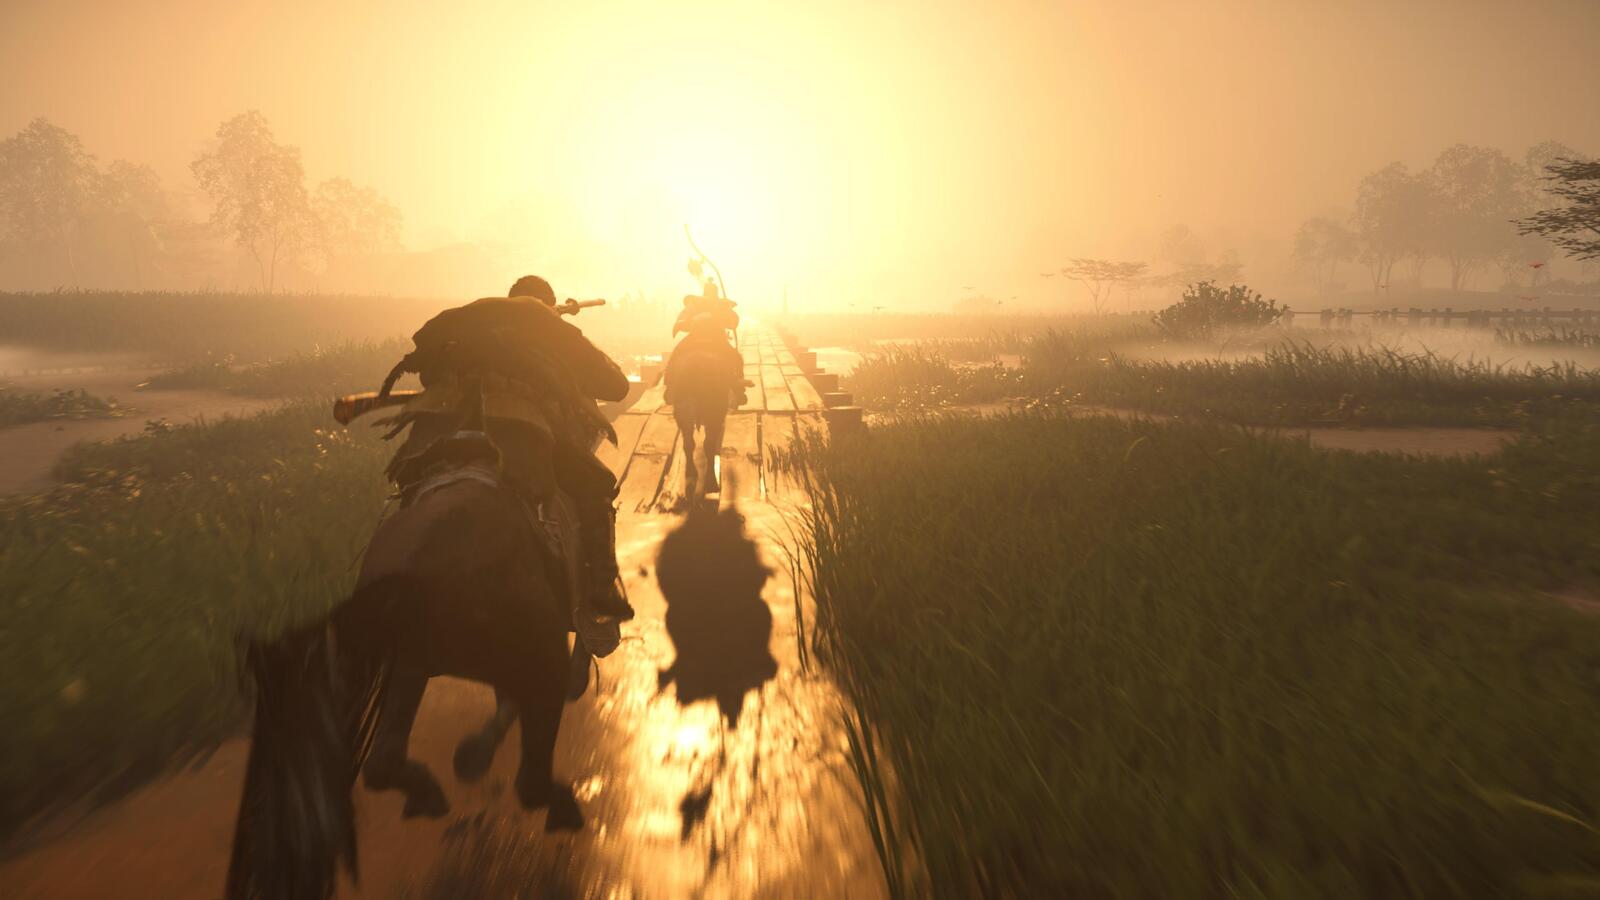 Two people riding on horses into the sunset